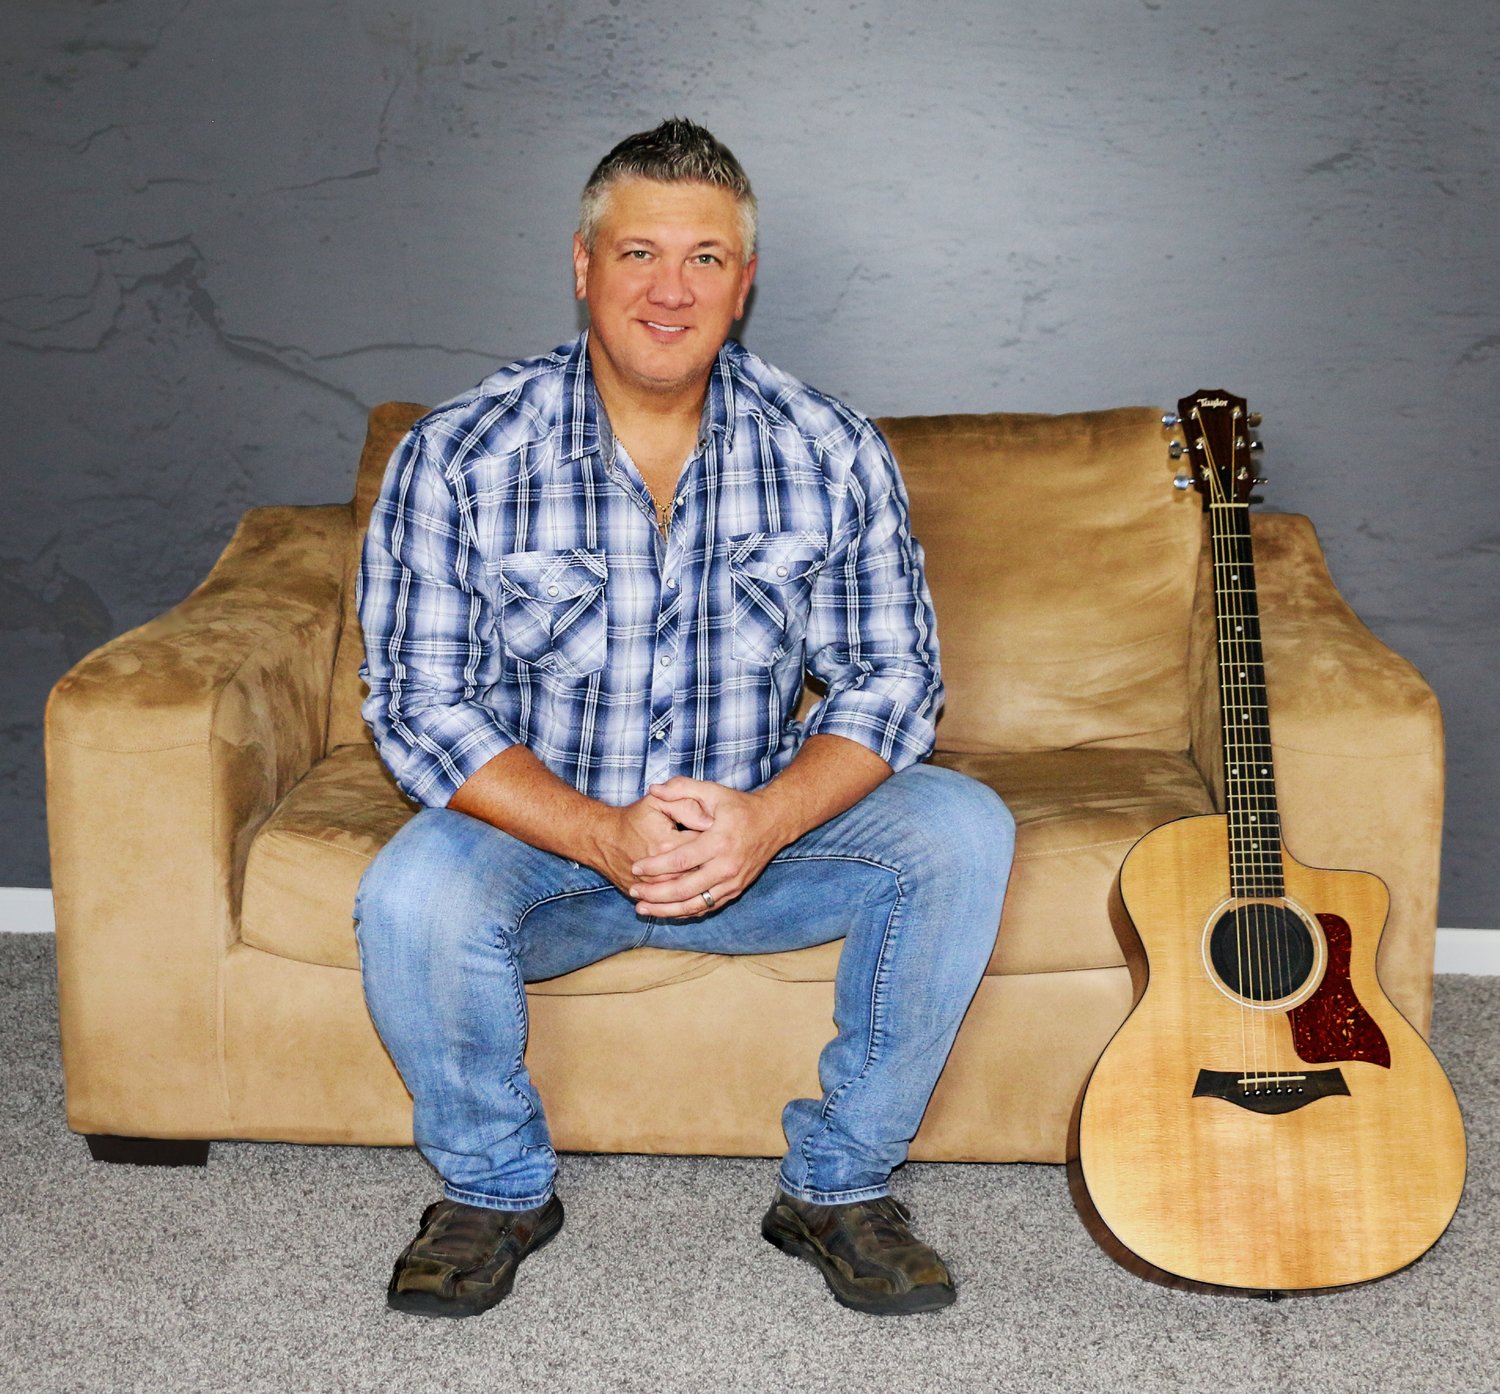 Steven Trent and Small Town will be the featured performers on the opening night of the 2023 Strawberry Festival. This year's festival runs June 9-11.